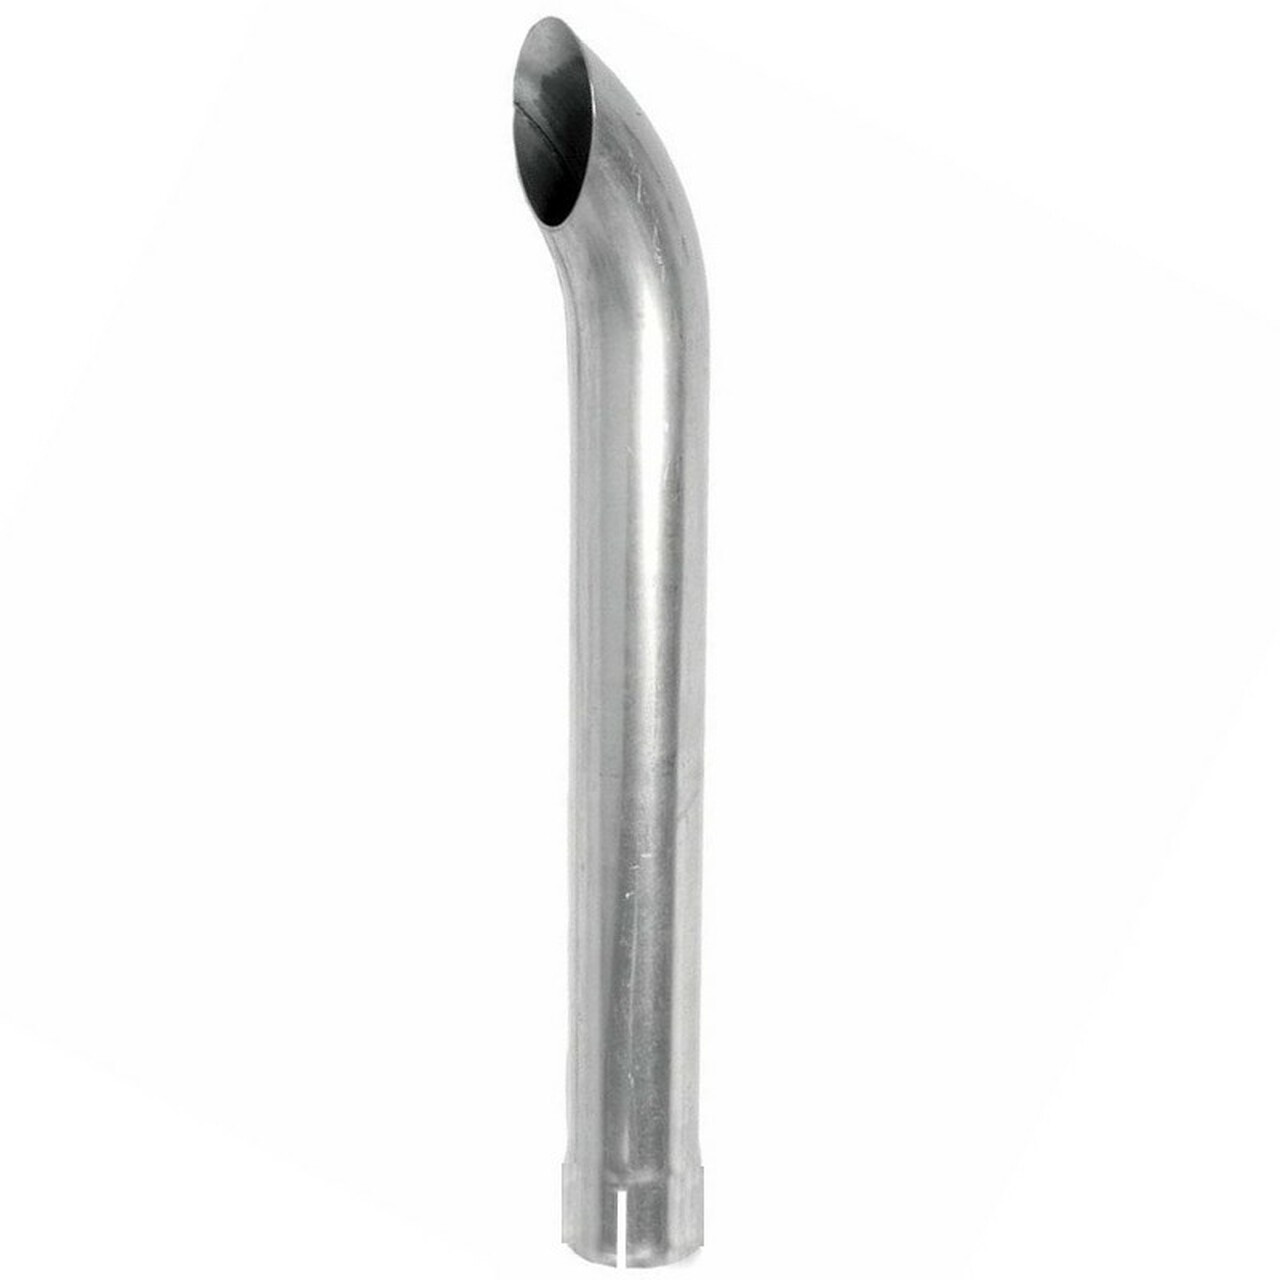 Stainless Steel Flexible Exhaust Pipe - 24 Long x 3.5 ID